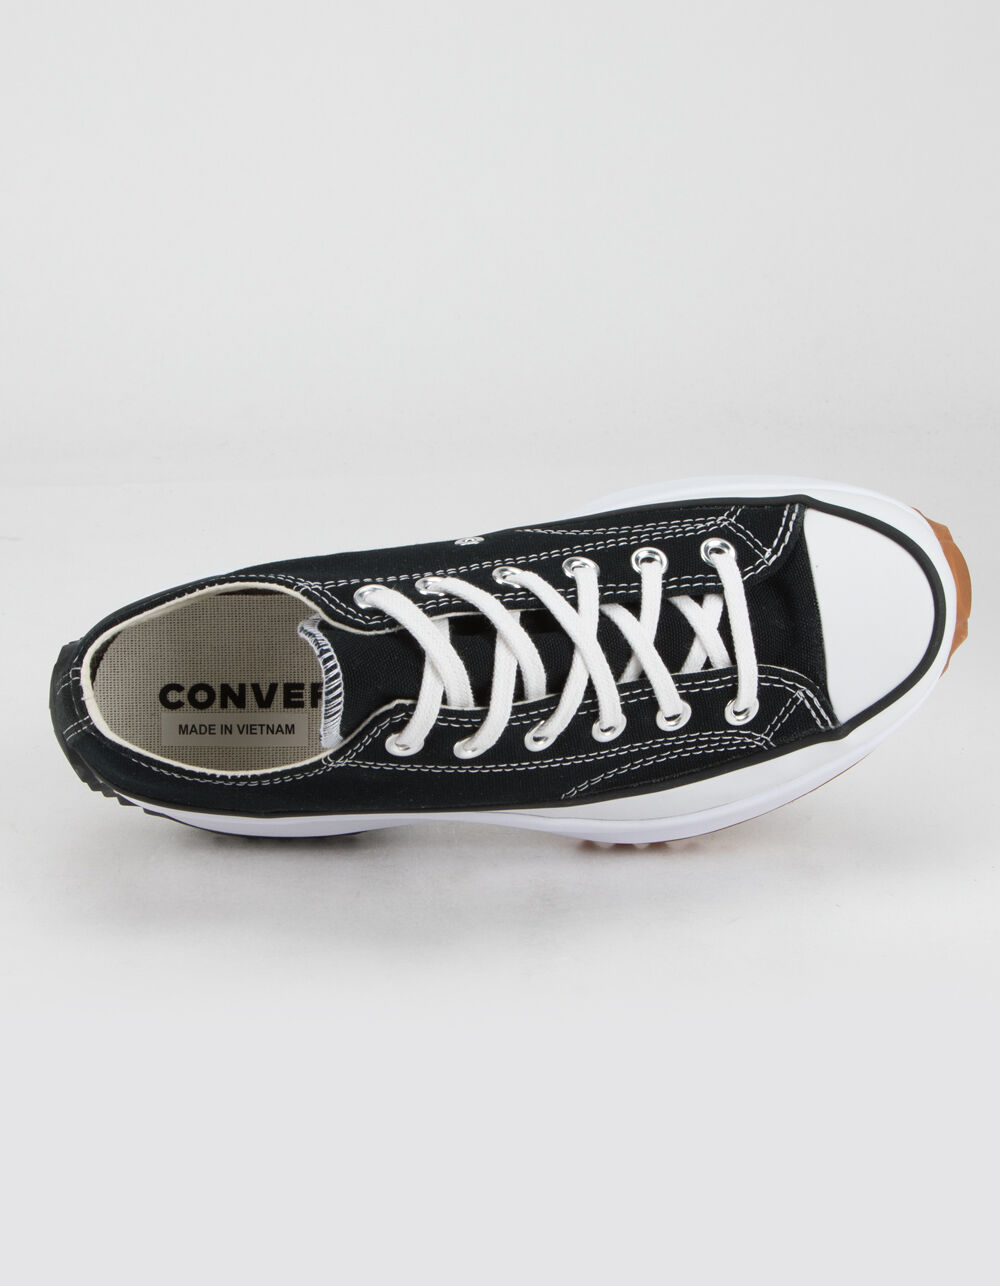 CONVERSE Run Star Hike Womens Low Top Shoes - BLACK/WHITE | Tillys